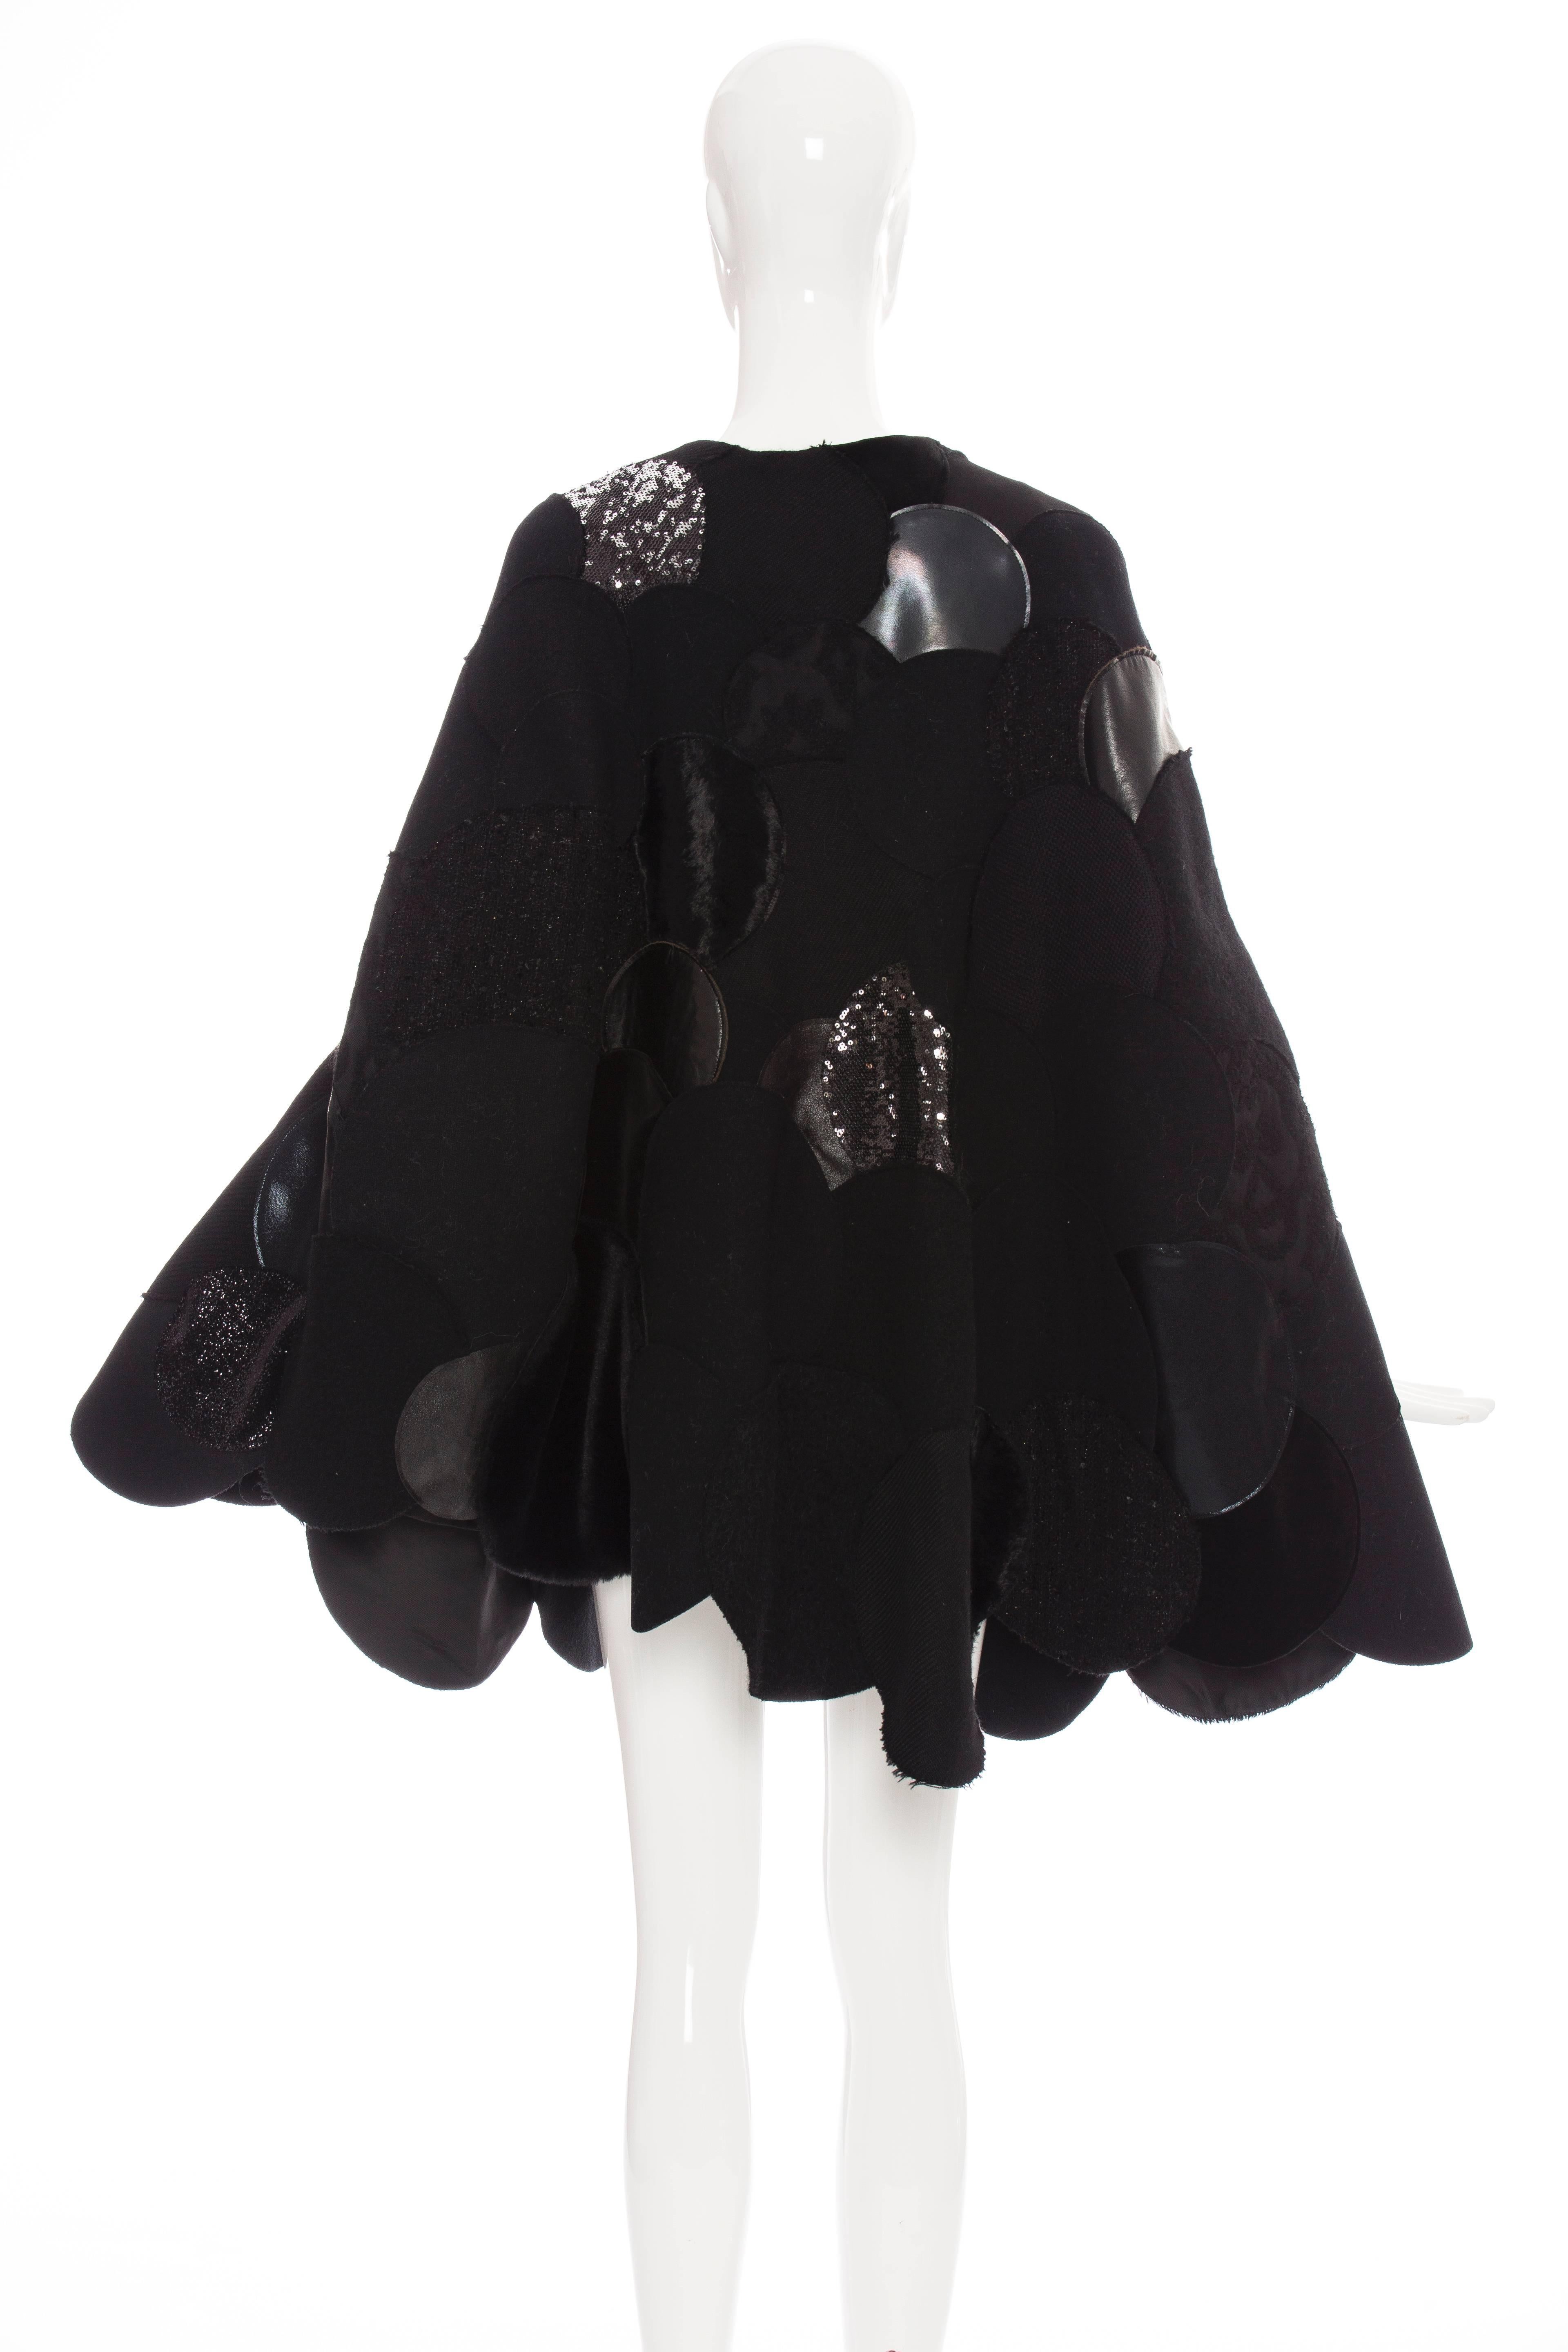 Women's Junya Watanabe Comme des Garcons Black Wool Sequin Leather Cape, Fall 2014